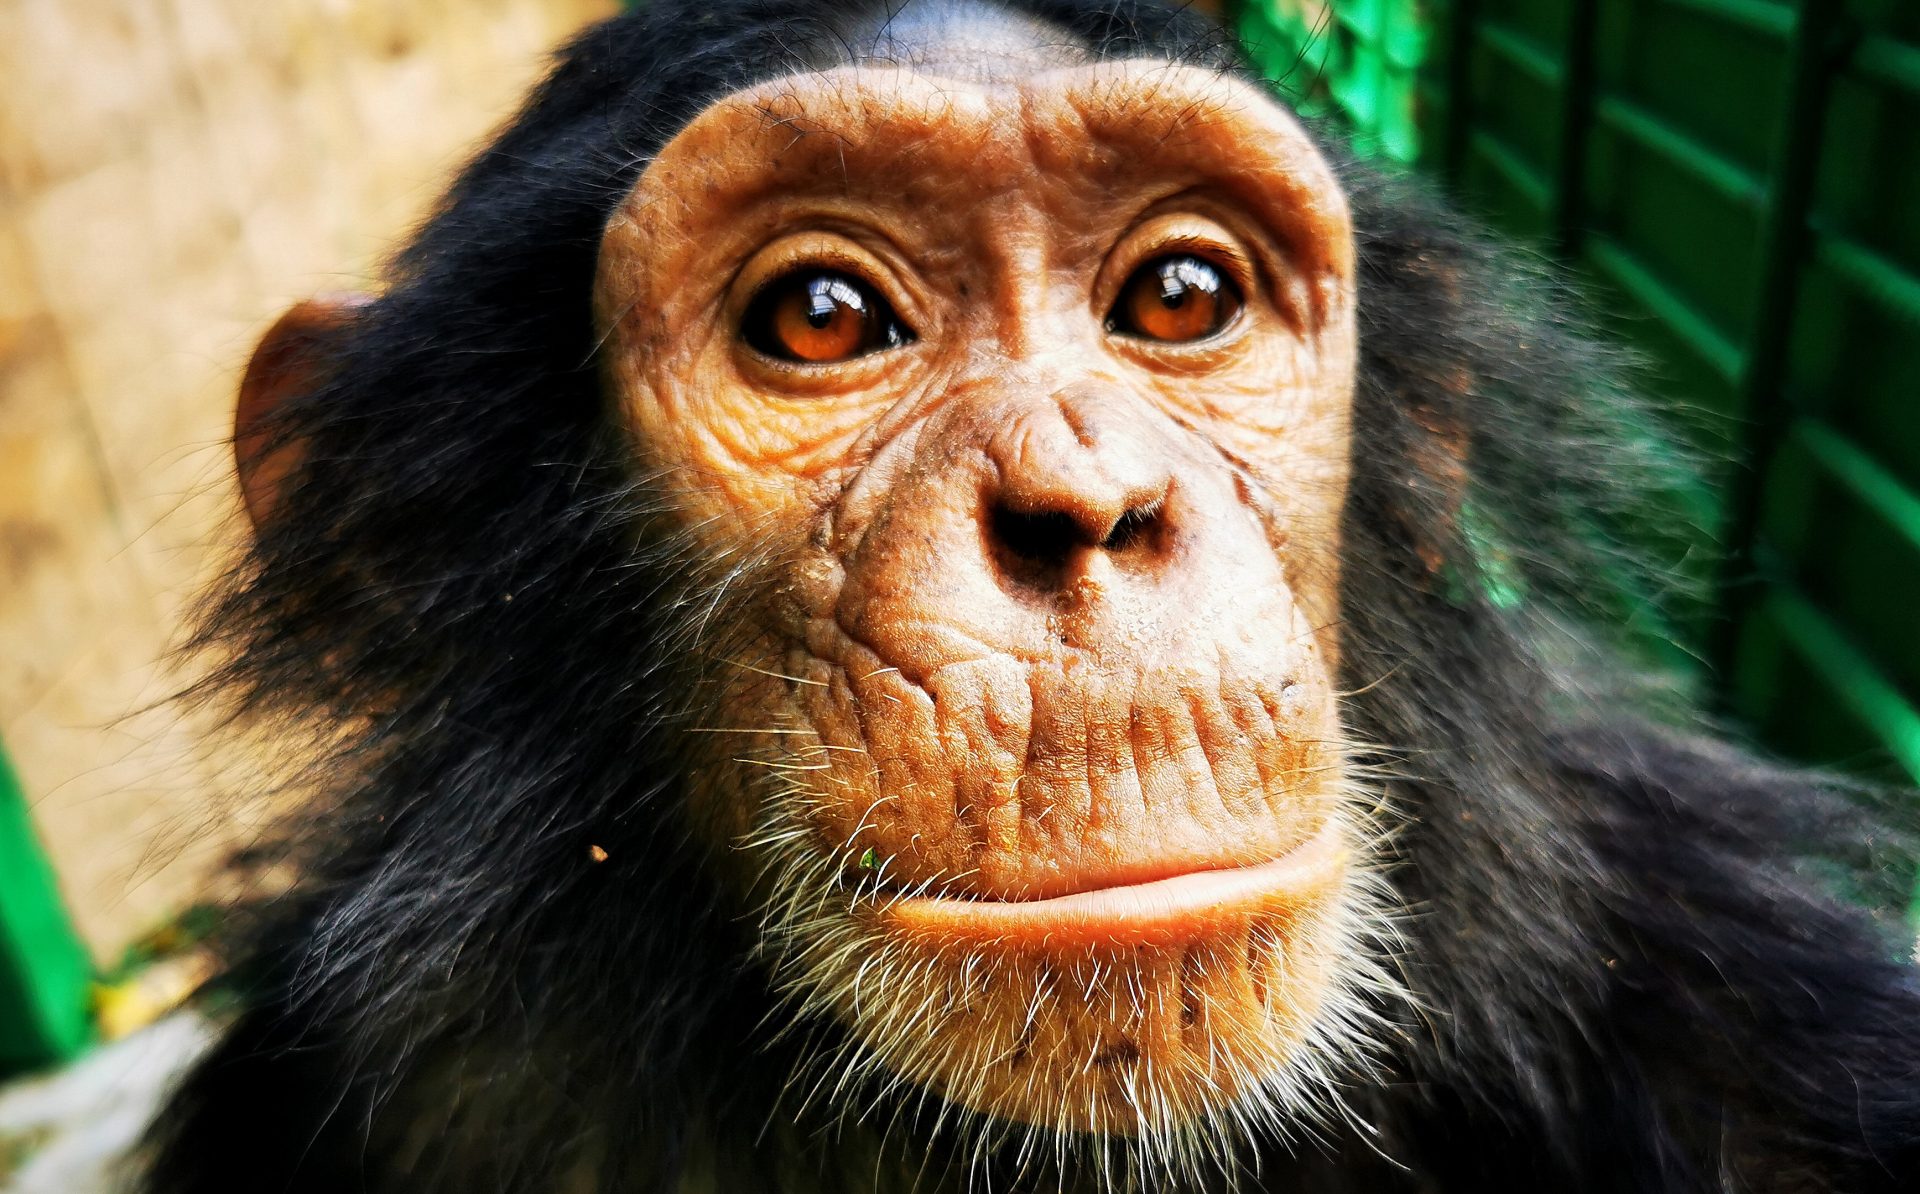 World Great Apes Day in France